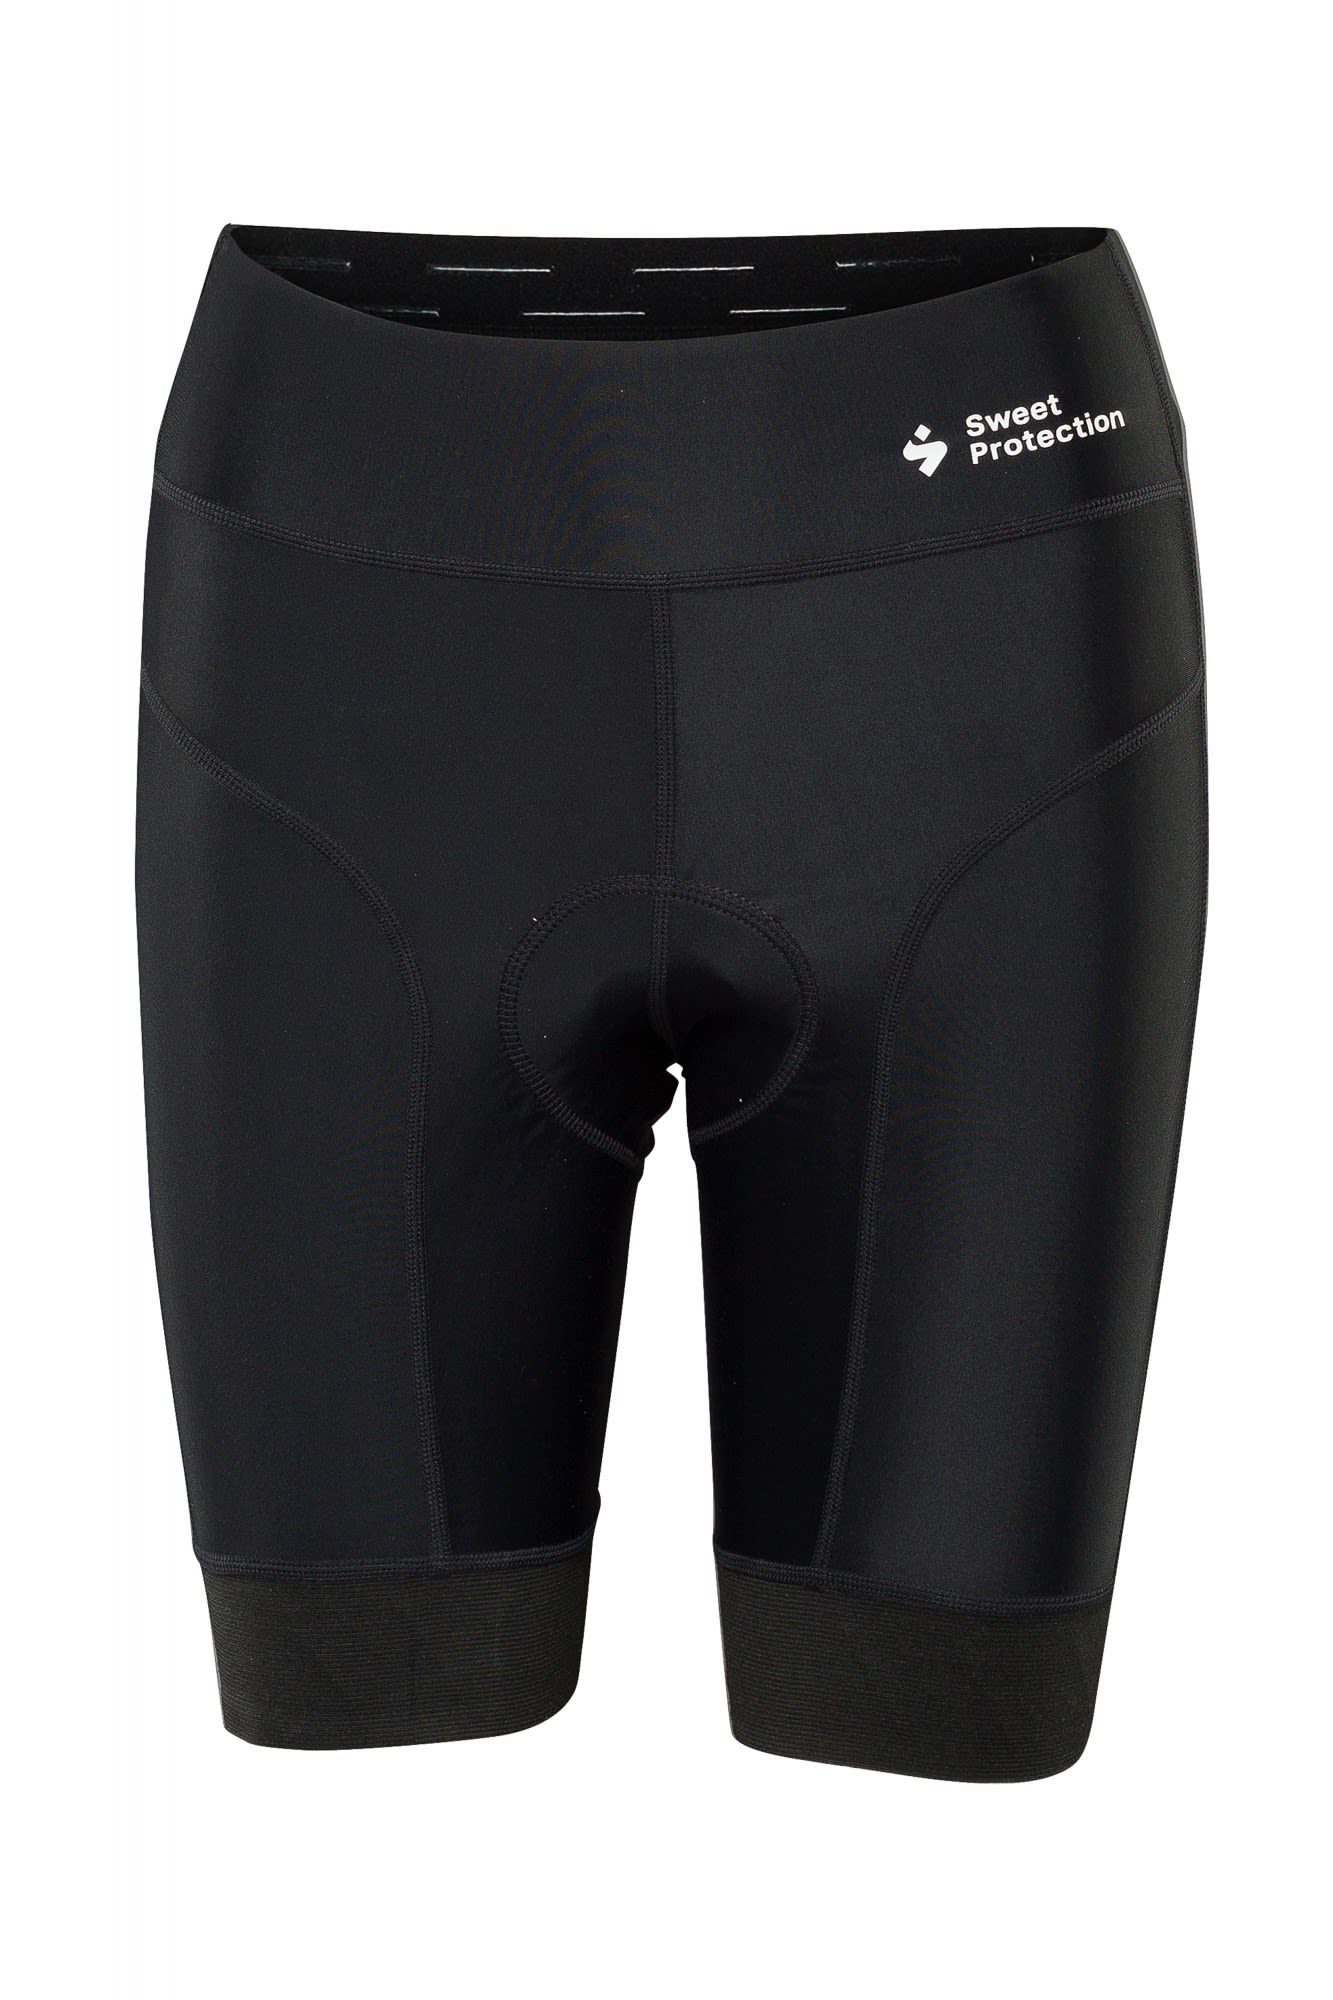 Sweet Protection Shorts Sweet Protection W Hunter Roller Shorts Damen